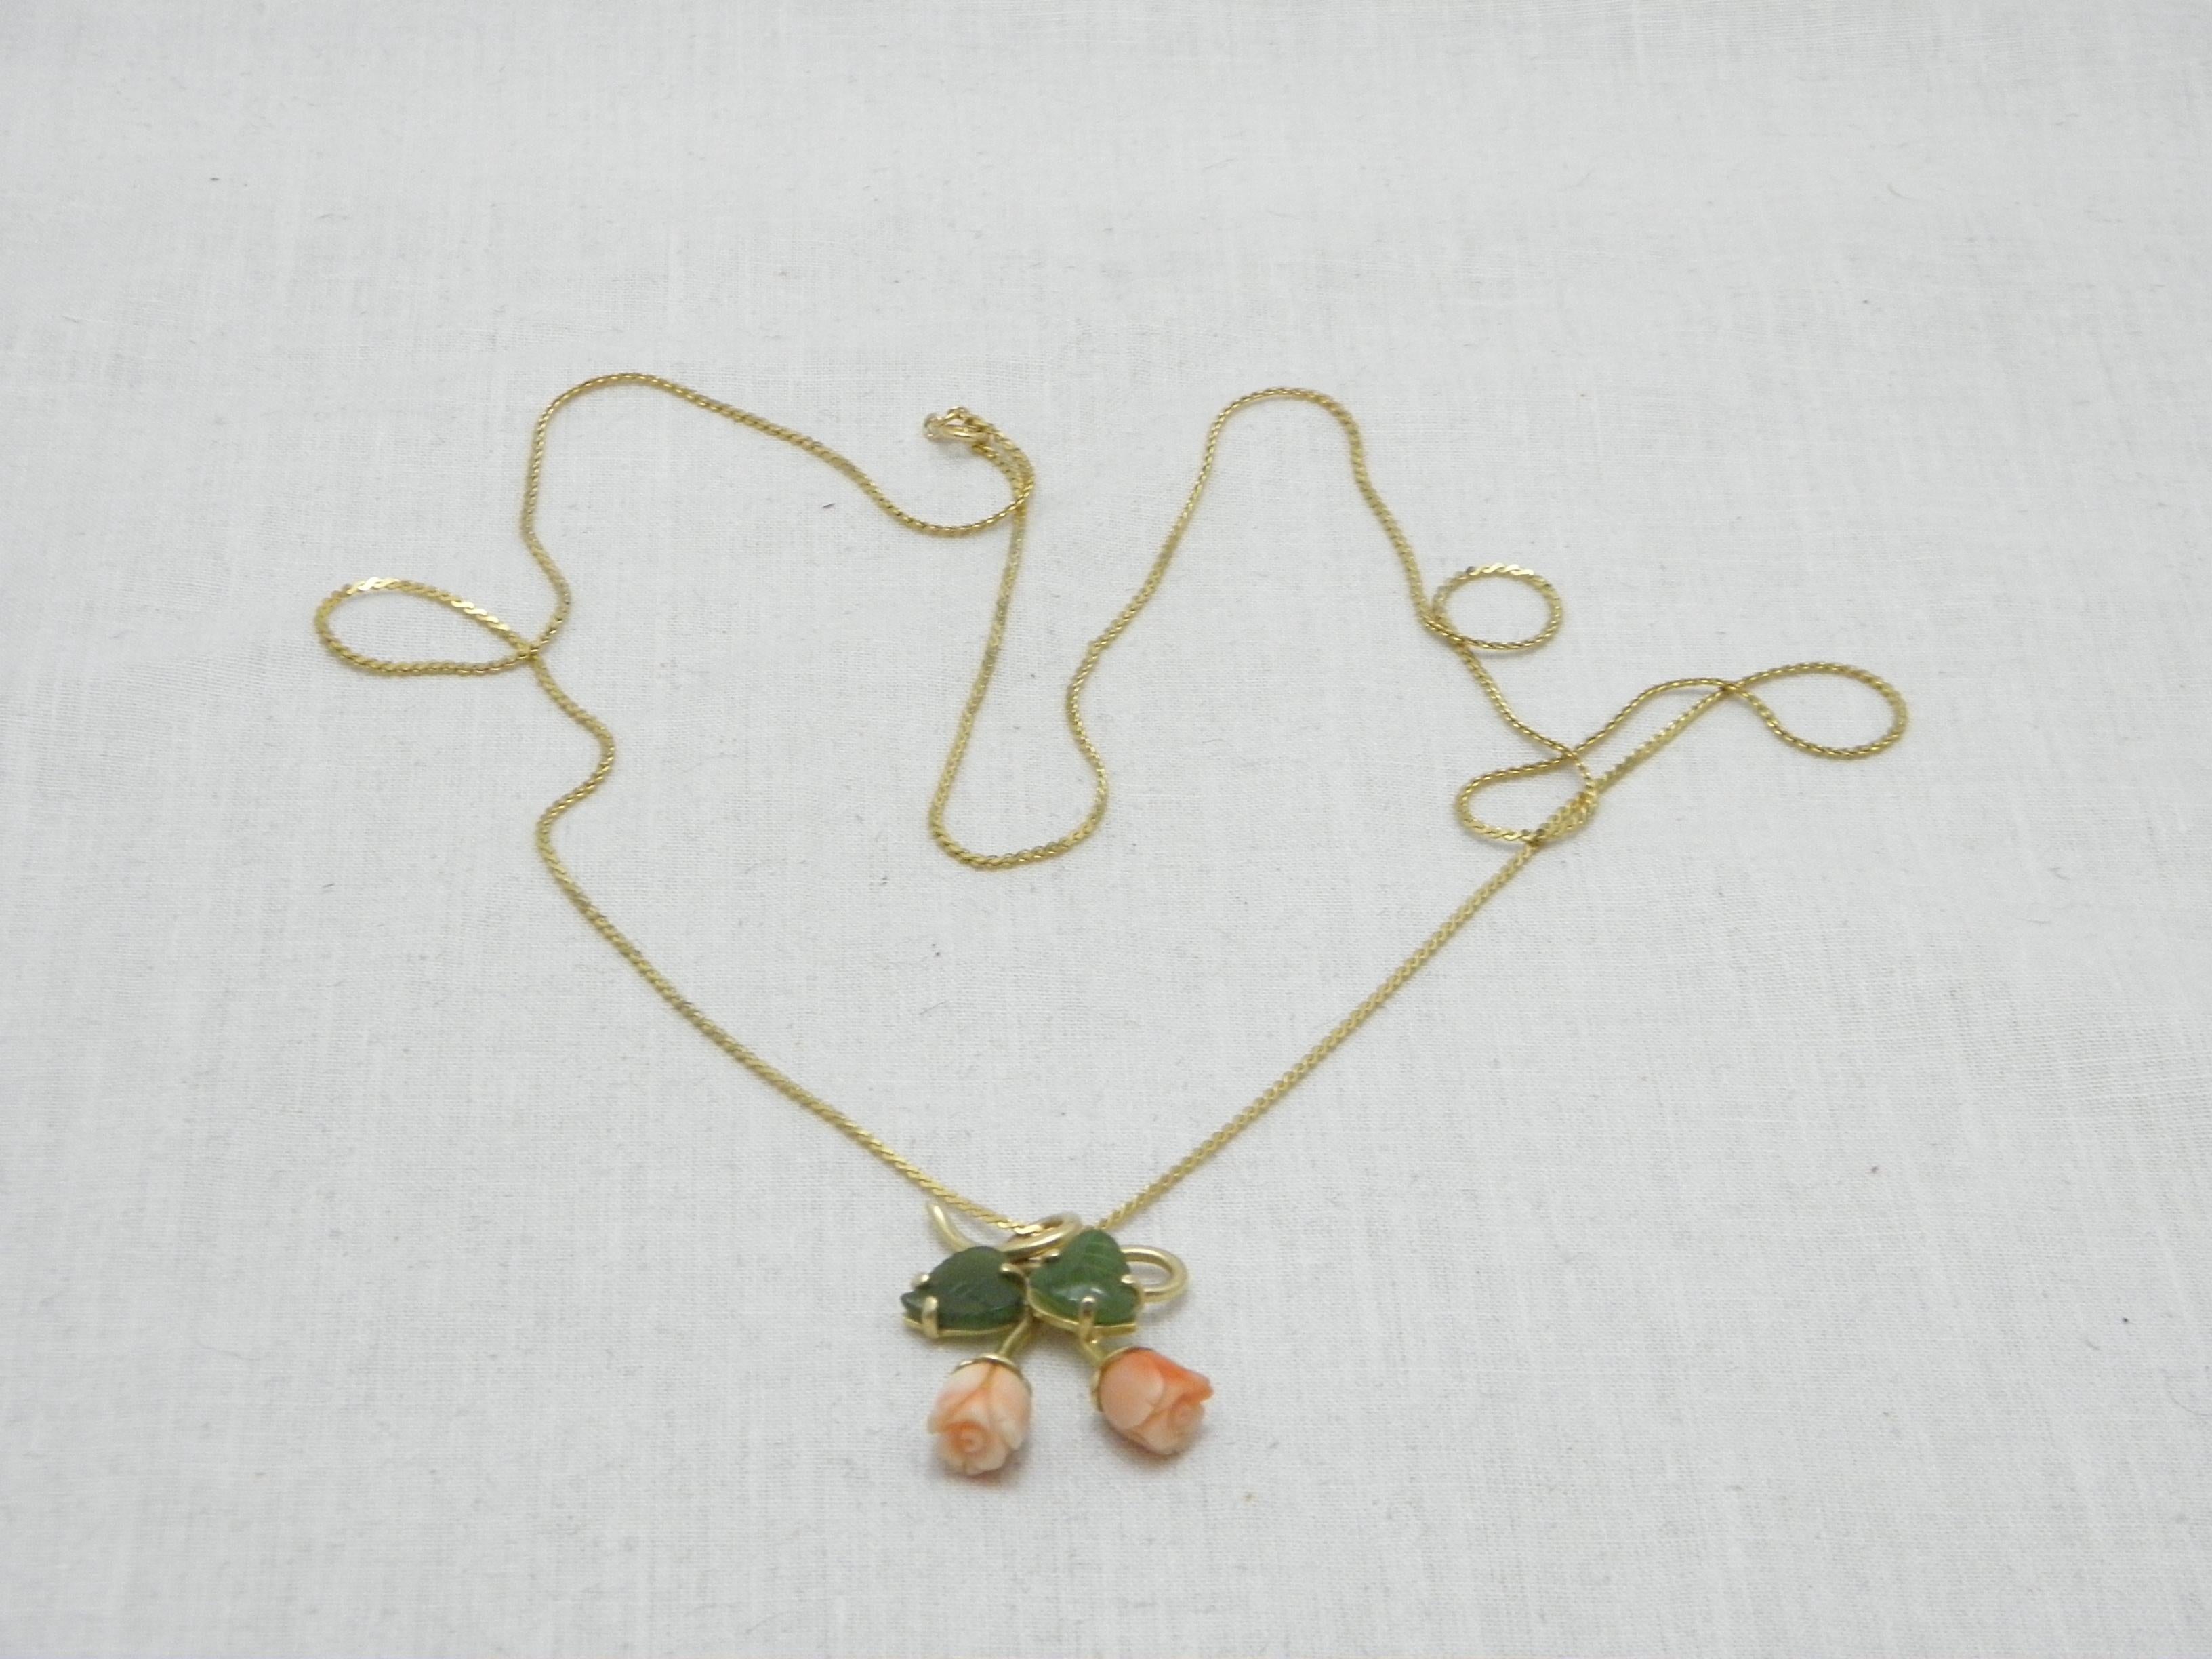 Antique 14ct Gold Jade Coral Roses Pendant Necklace Byzantine Chain 585 28 Inch For Sale 2